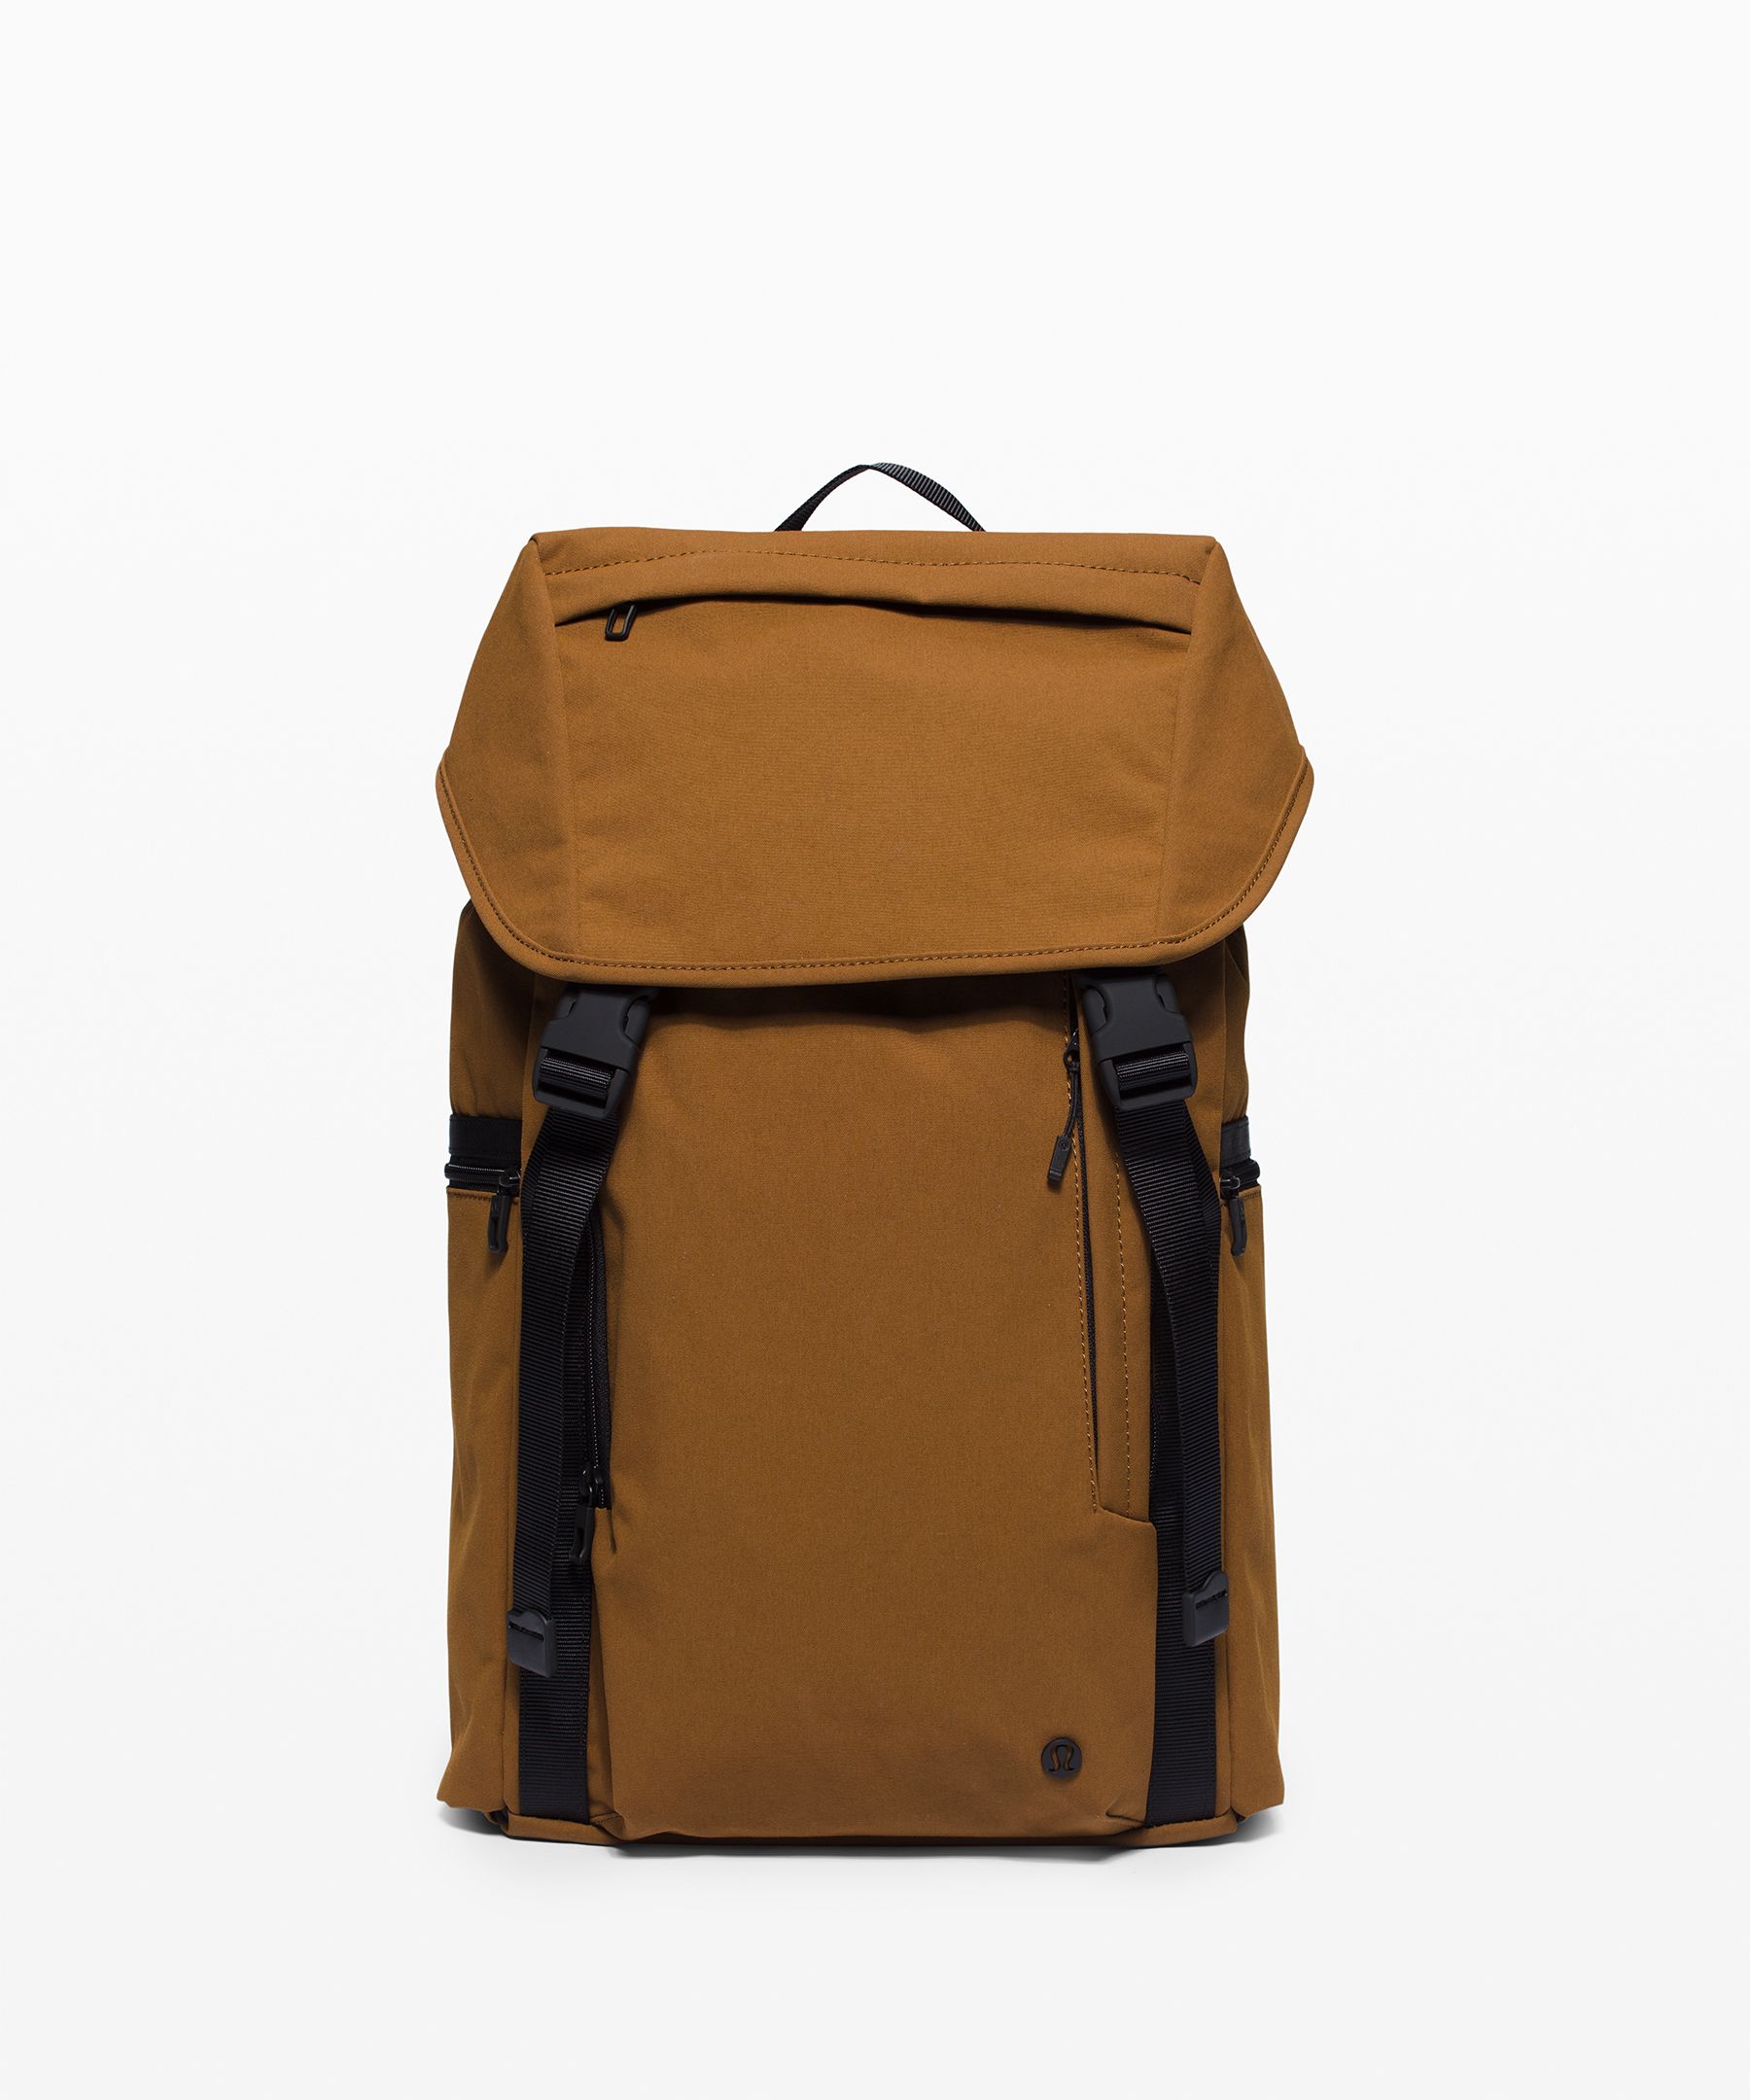 lululemon command the day backpack review